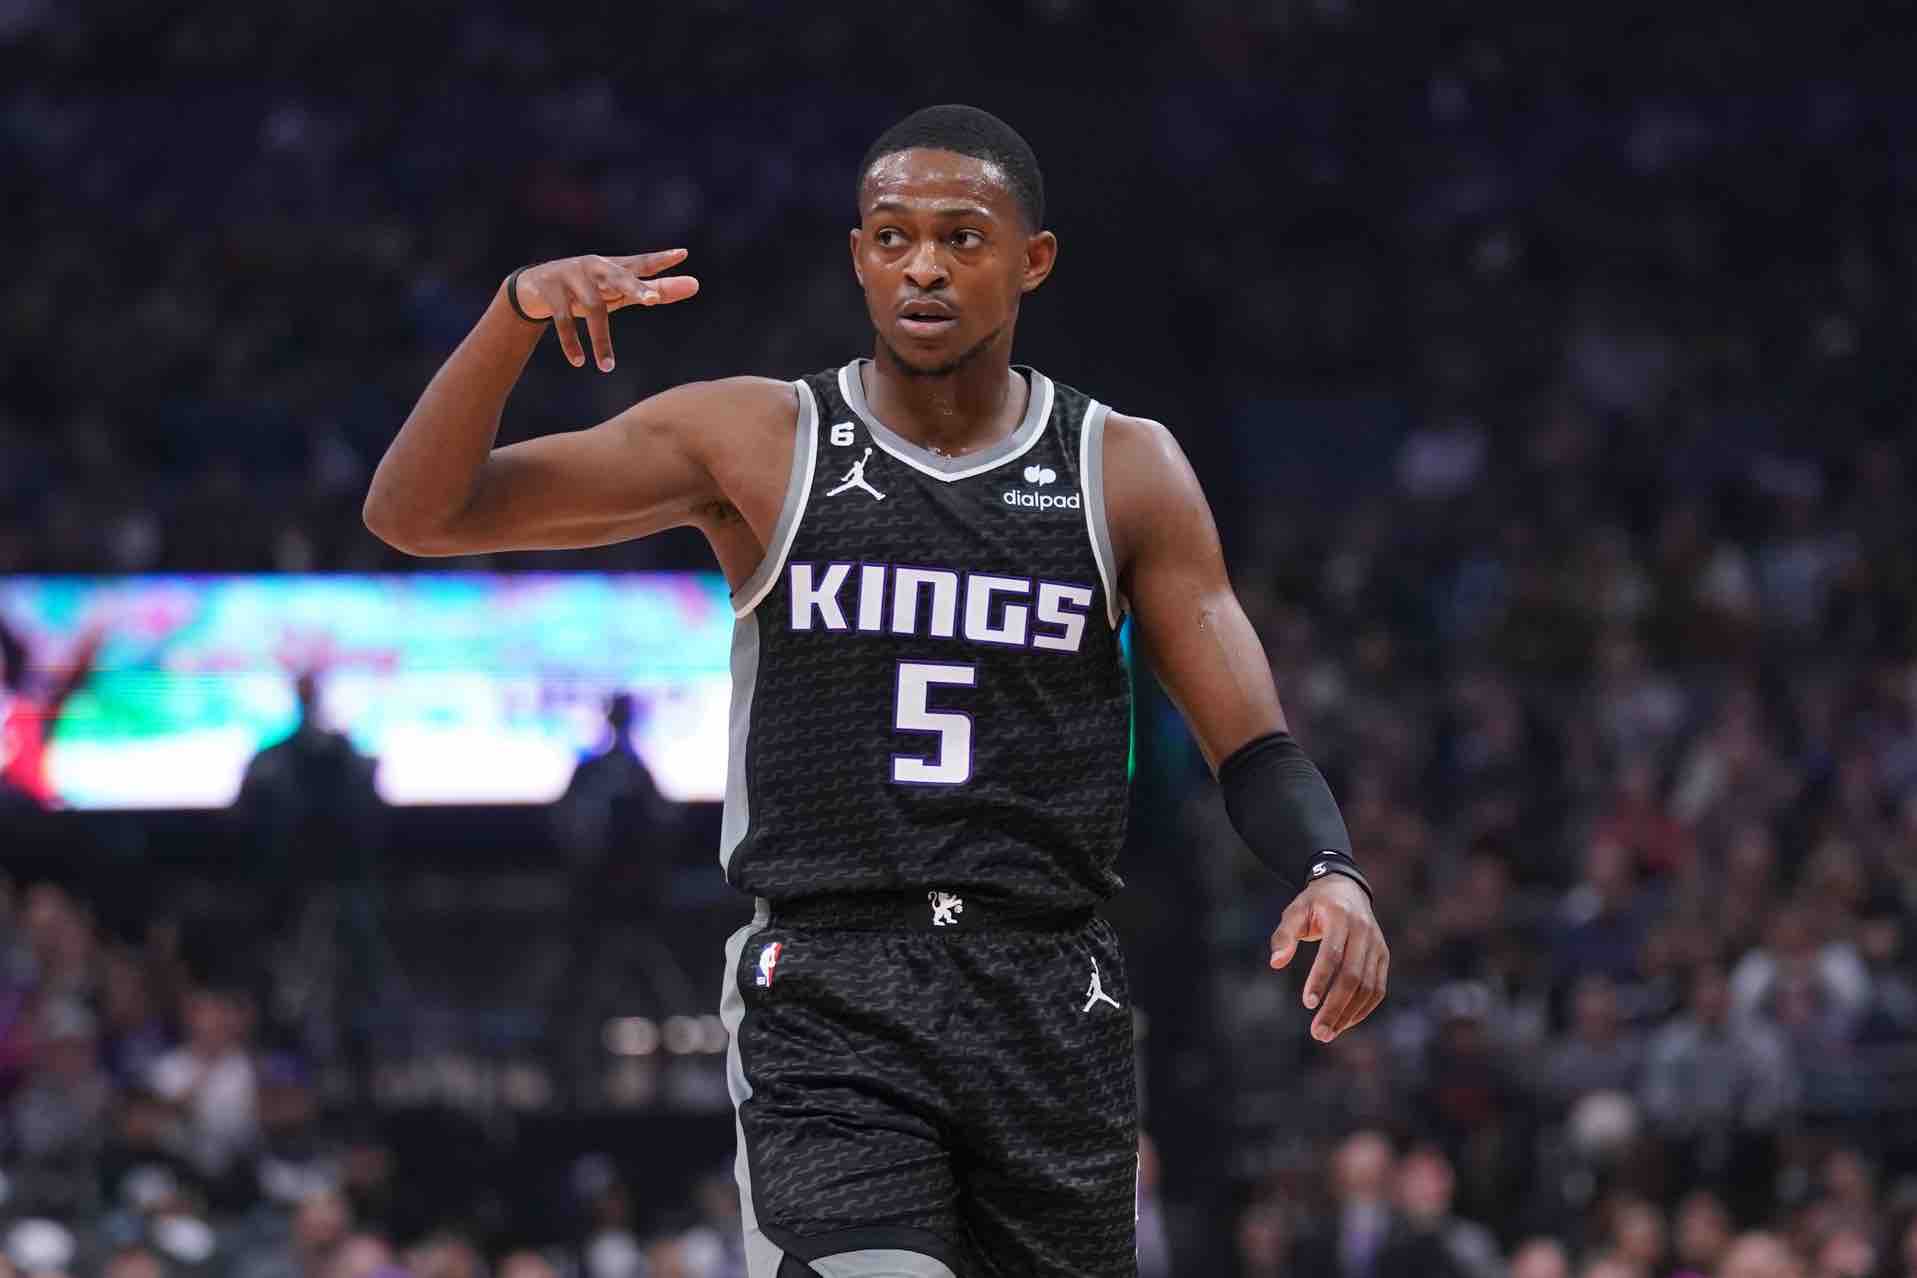 Fox has been one of the leaders for the 3rd place Kings, a spot that not even Kings fans would believe was possible before the start of the season.